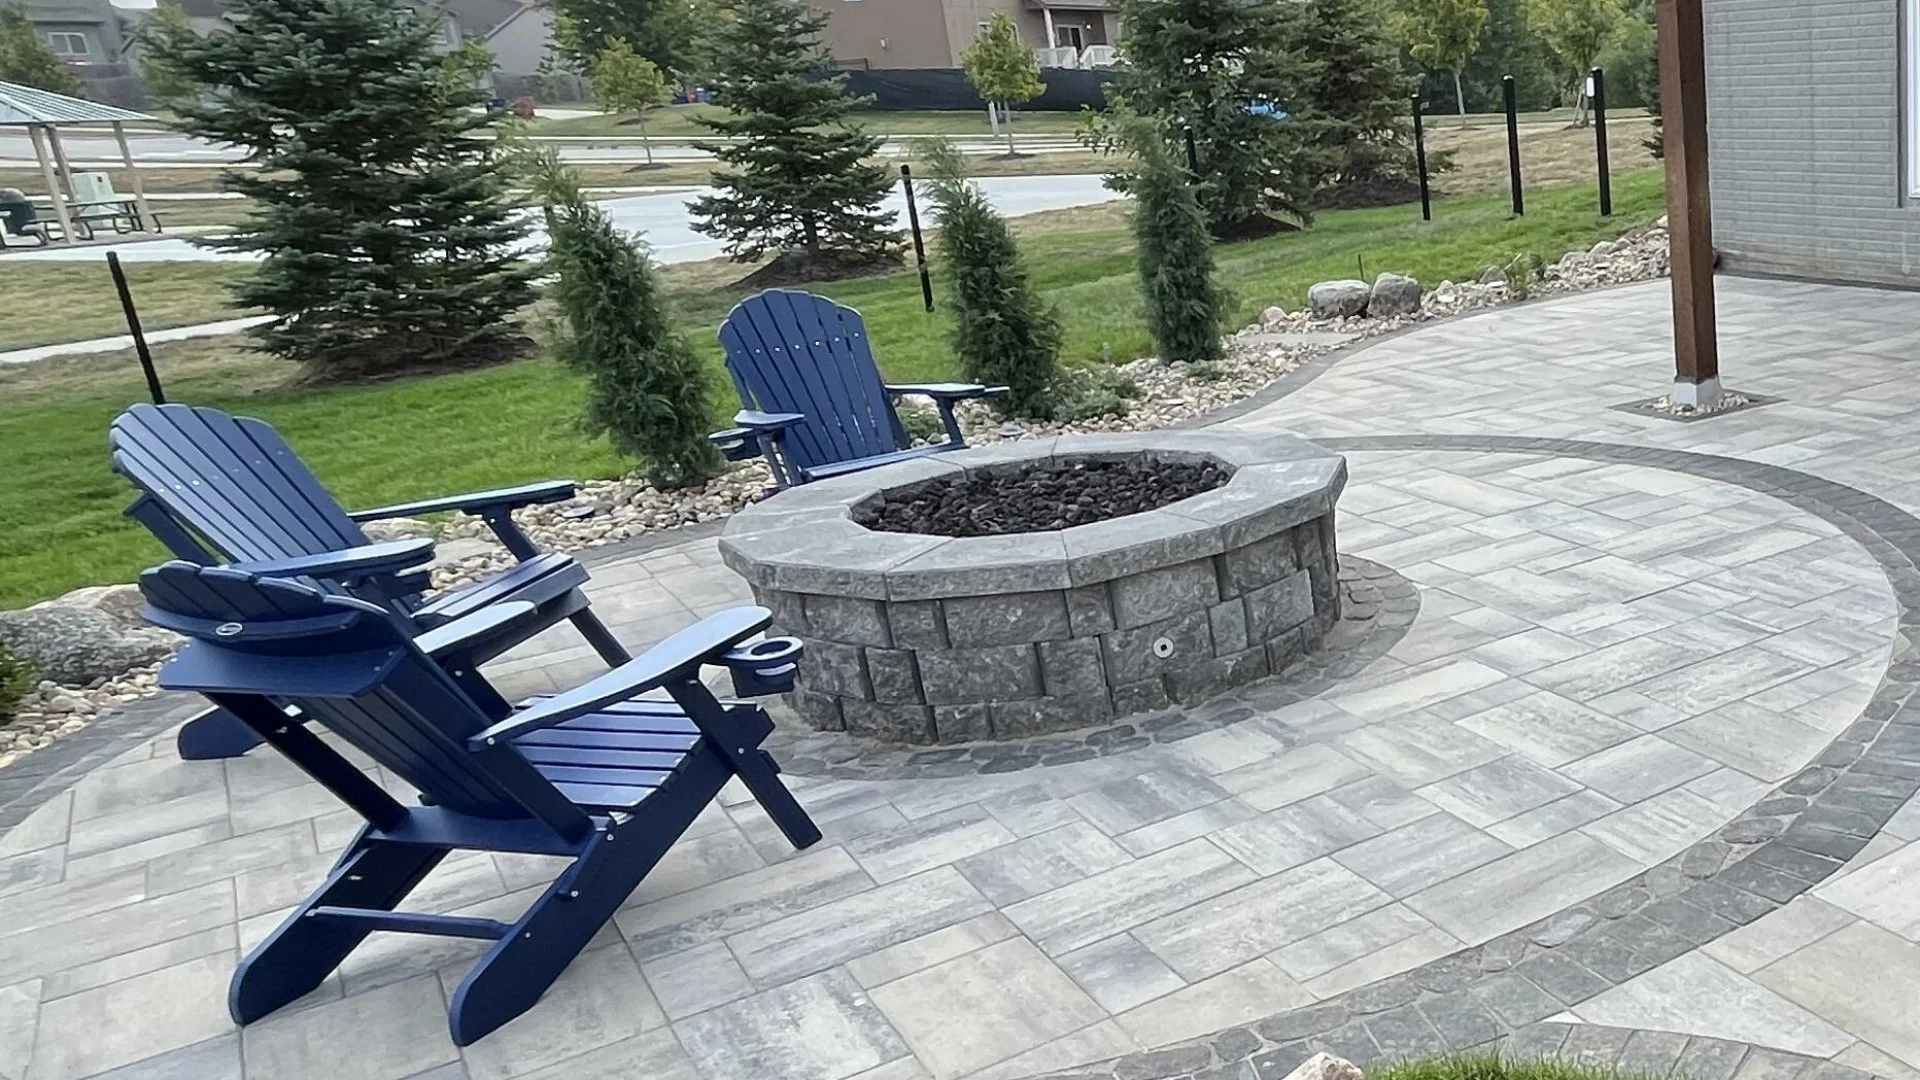 Consider These Questions When Choosing Between a Custom or Kit Fire Pit!